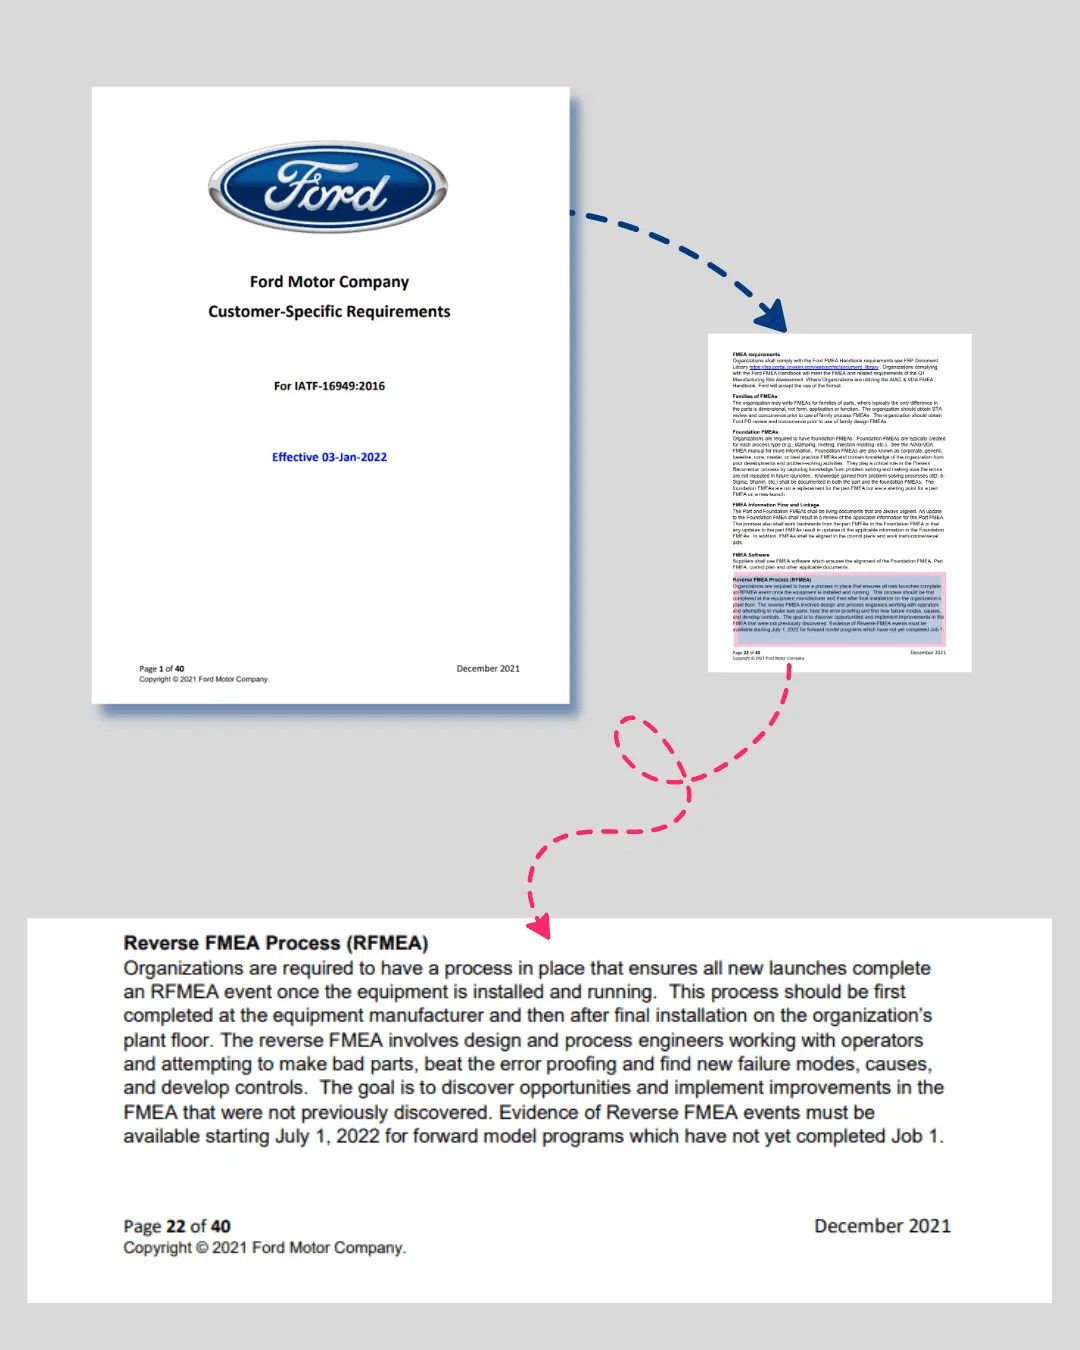 Ford Reverse FMEA requirement